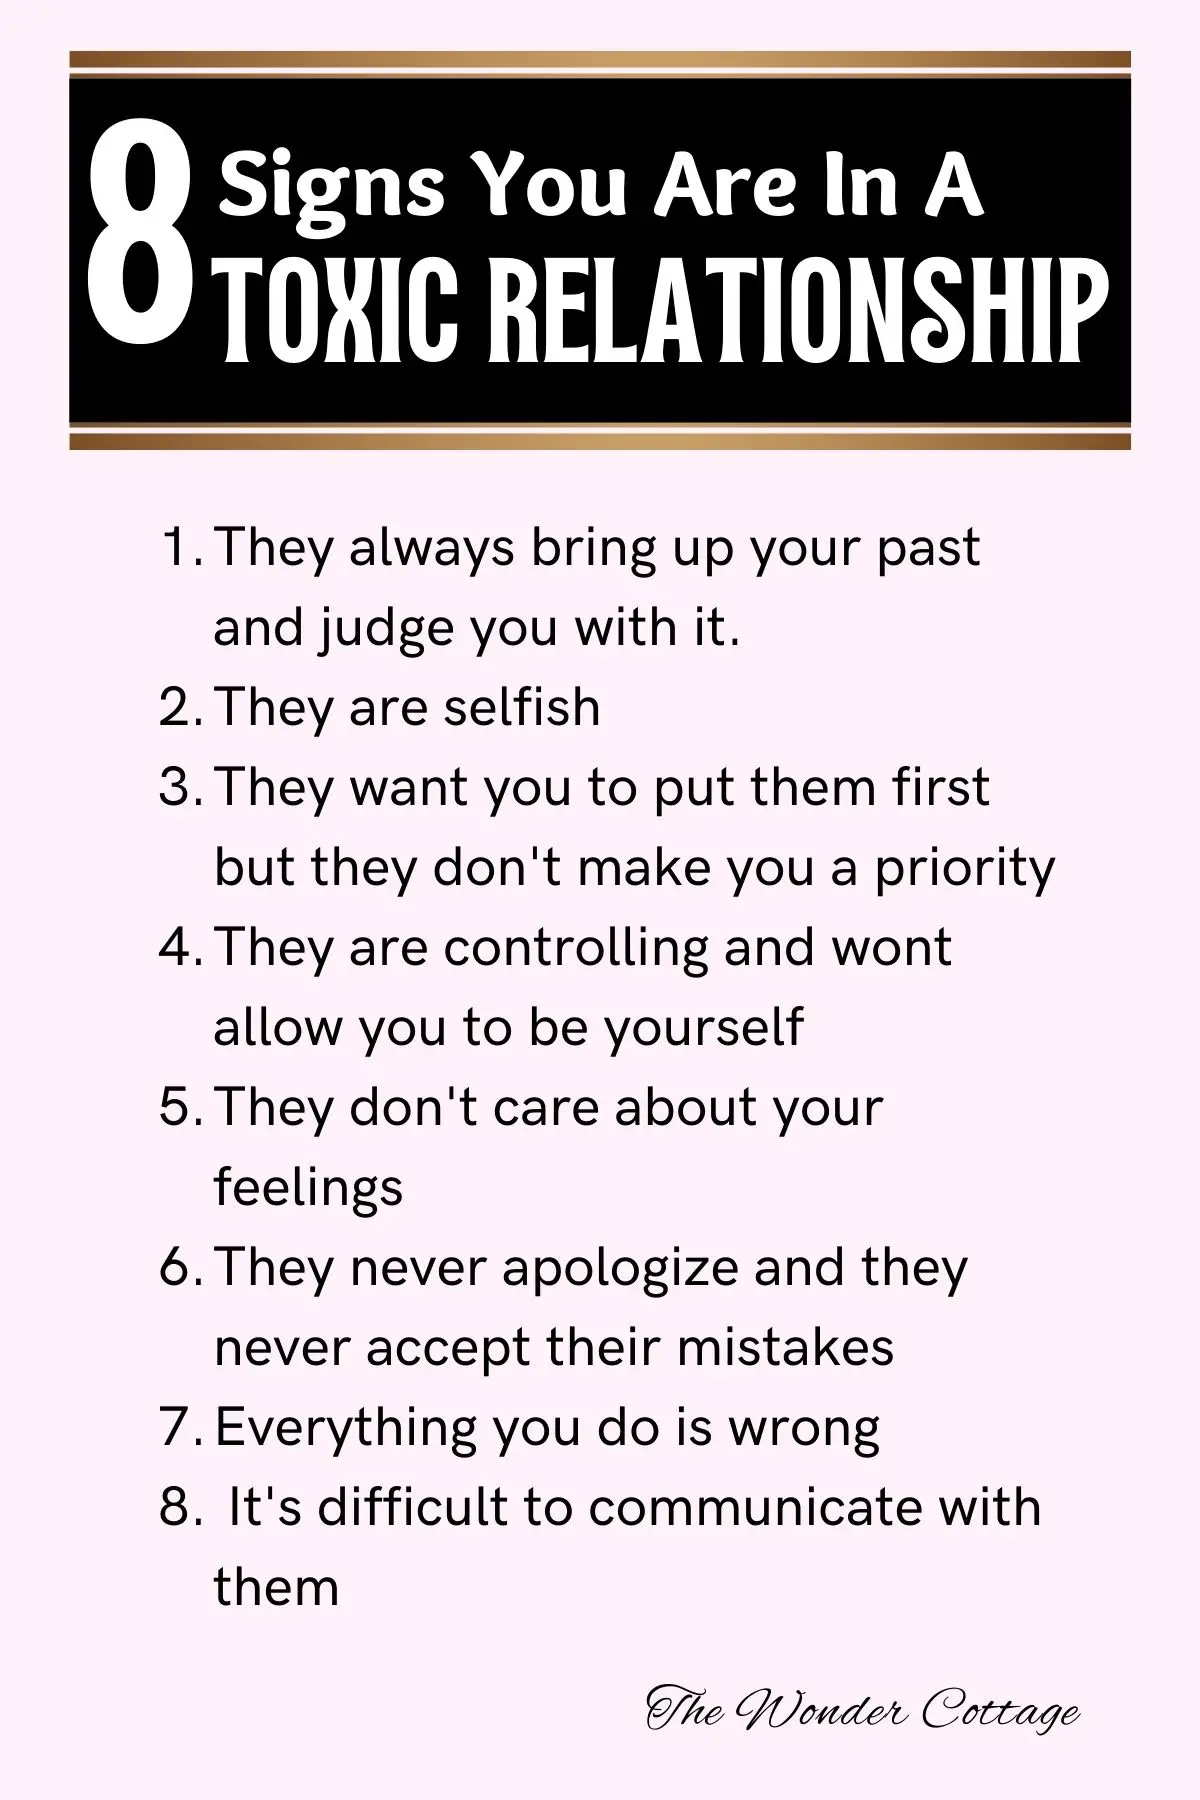 Signs you are in a toxic relationship